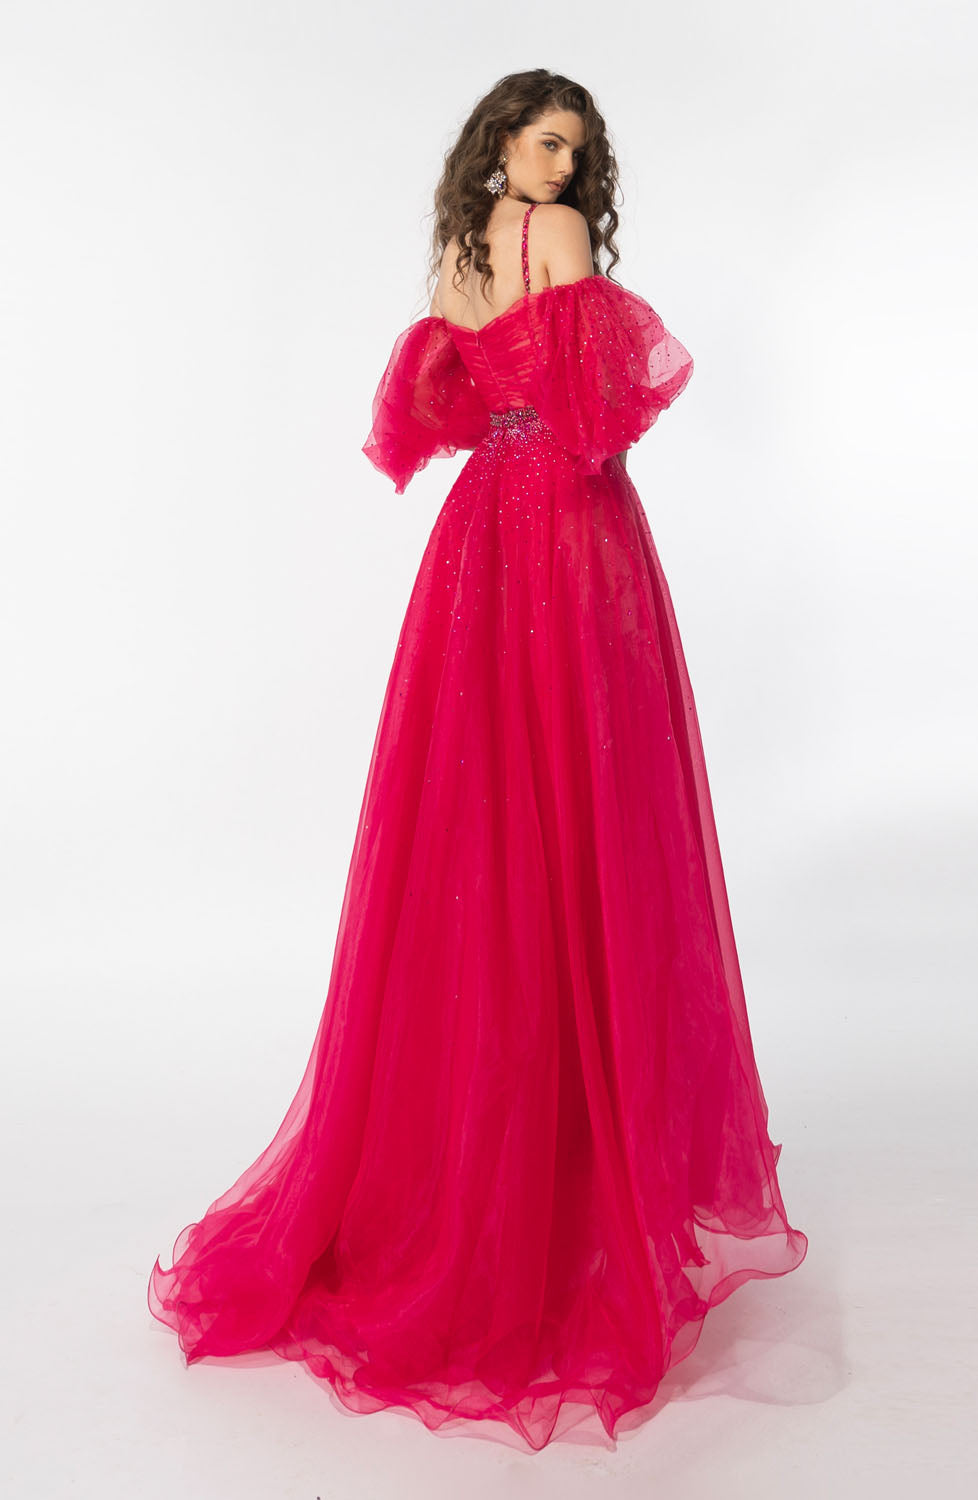 Ava Presley 28556 prom dresses images. Style 28556 by Ava Presley is available in these colors: Fuchsia, Black.